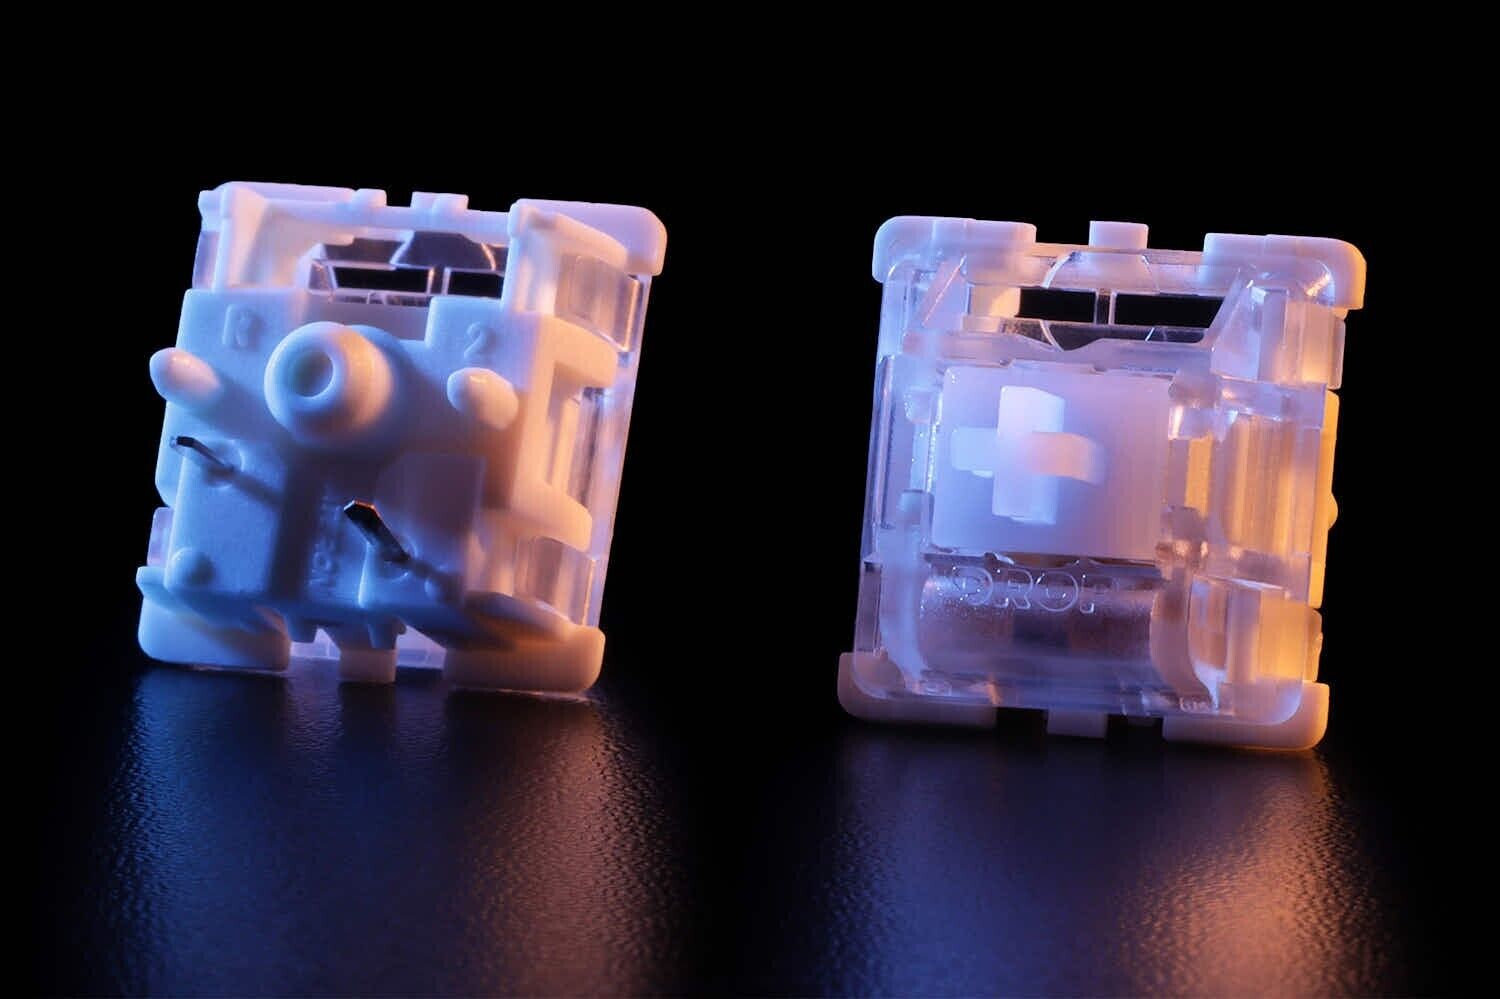 New Sealed Drop Holy Panda X Clear Mechanical Switches, 5 Pin 35 Pack $35 MSRP